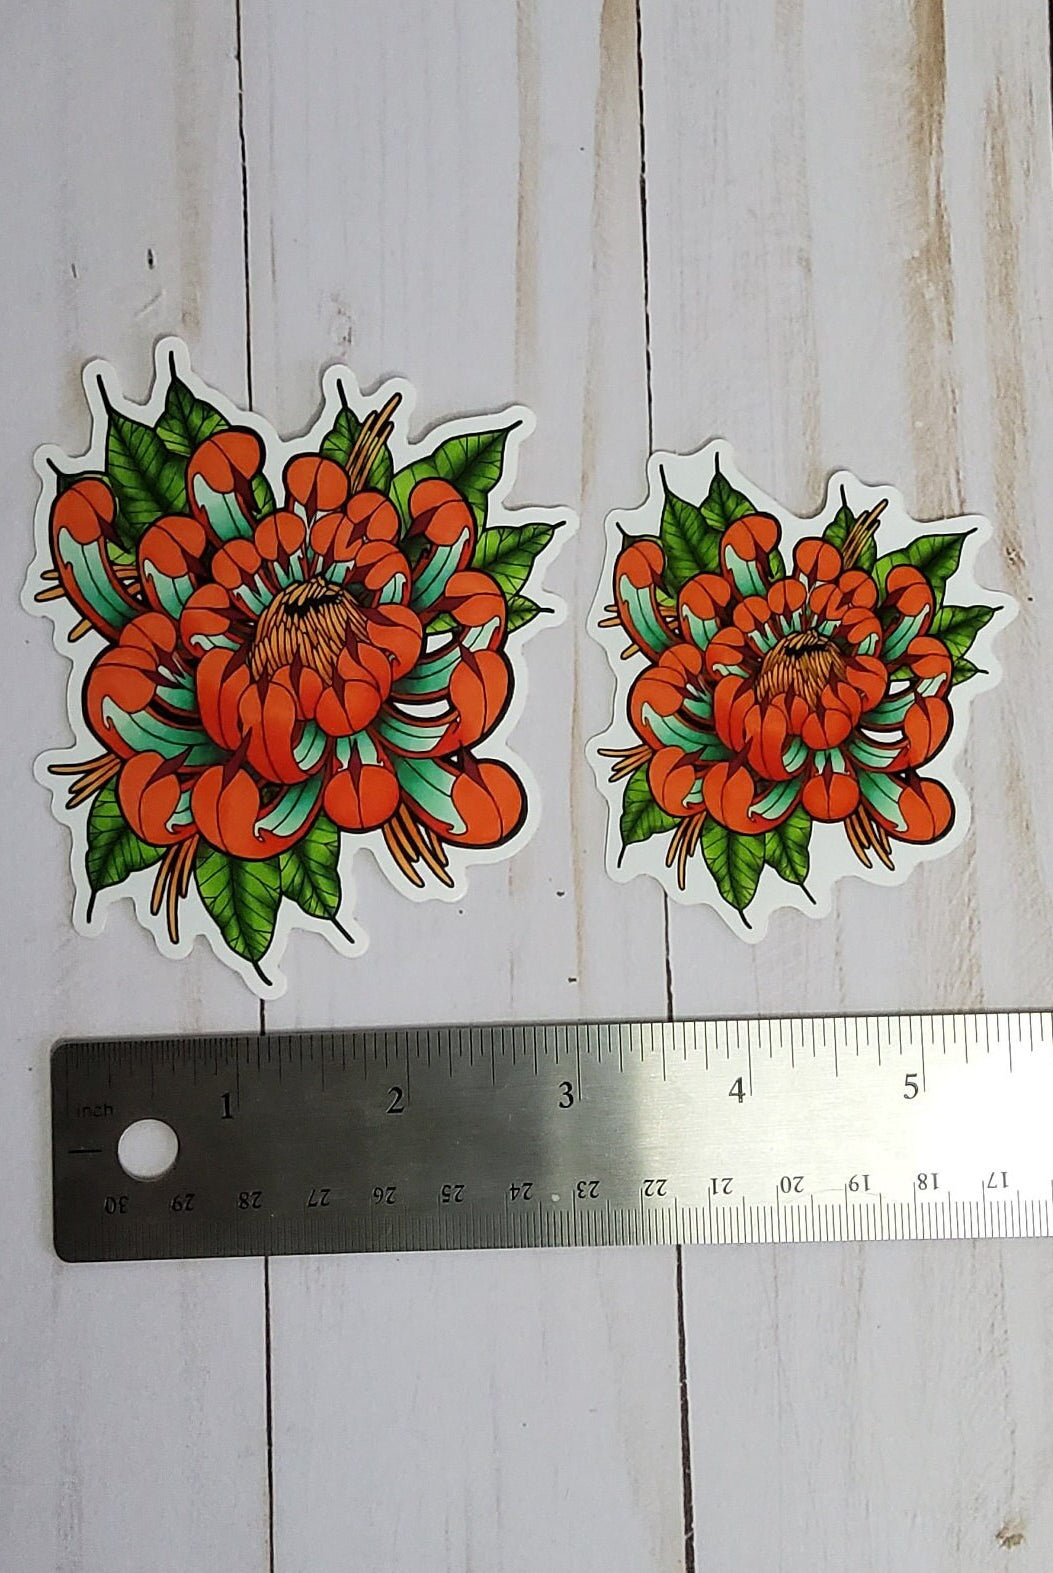 GLOSSY STICKER: Tattoo Style Teal and Orange Chrysanthemum , Chrysanthemum Sticker , Chrysanthemum Art , Floral Sticker , Floral Art Sticker